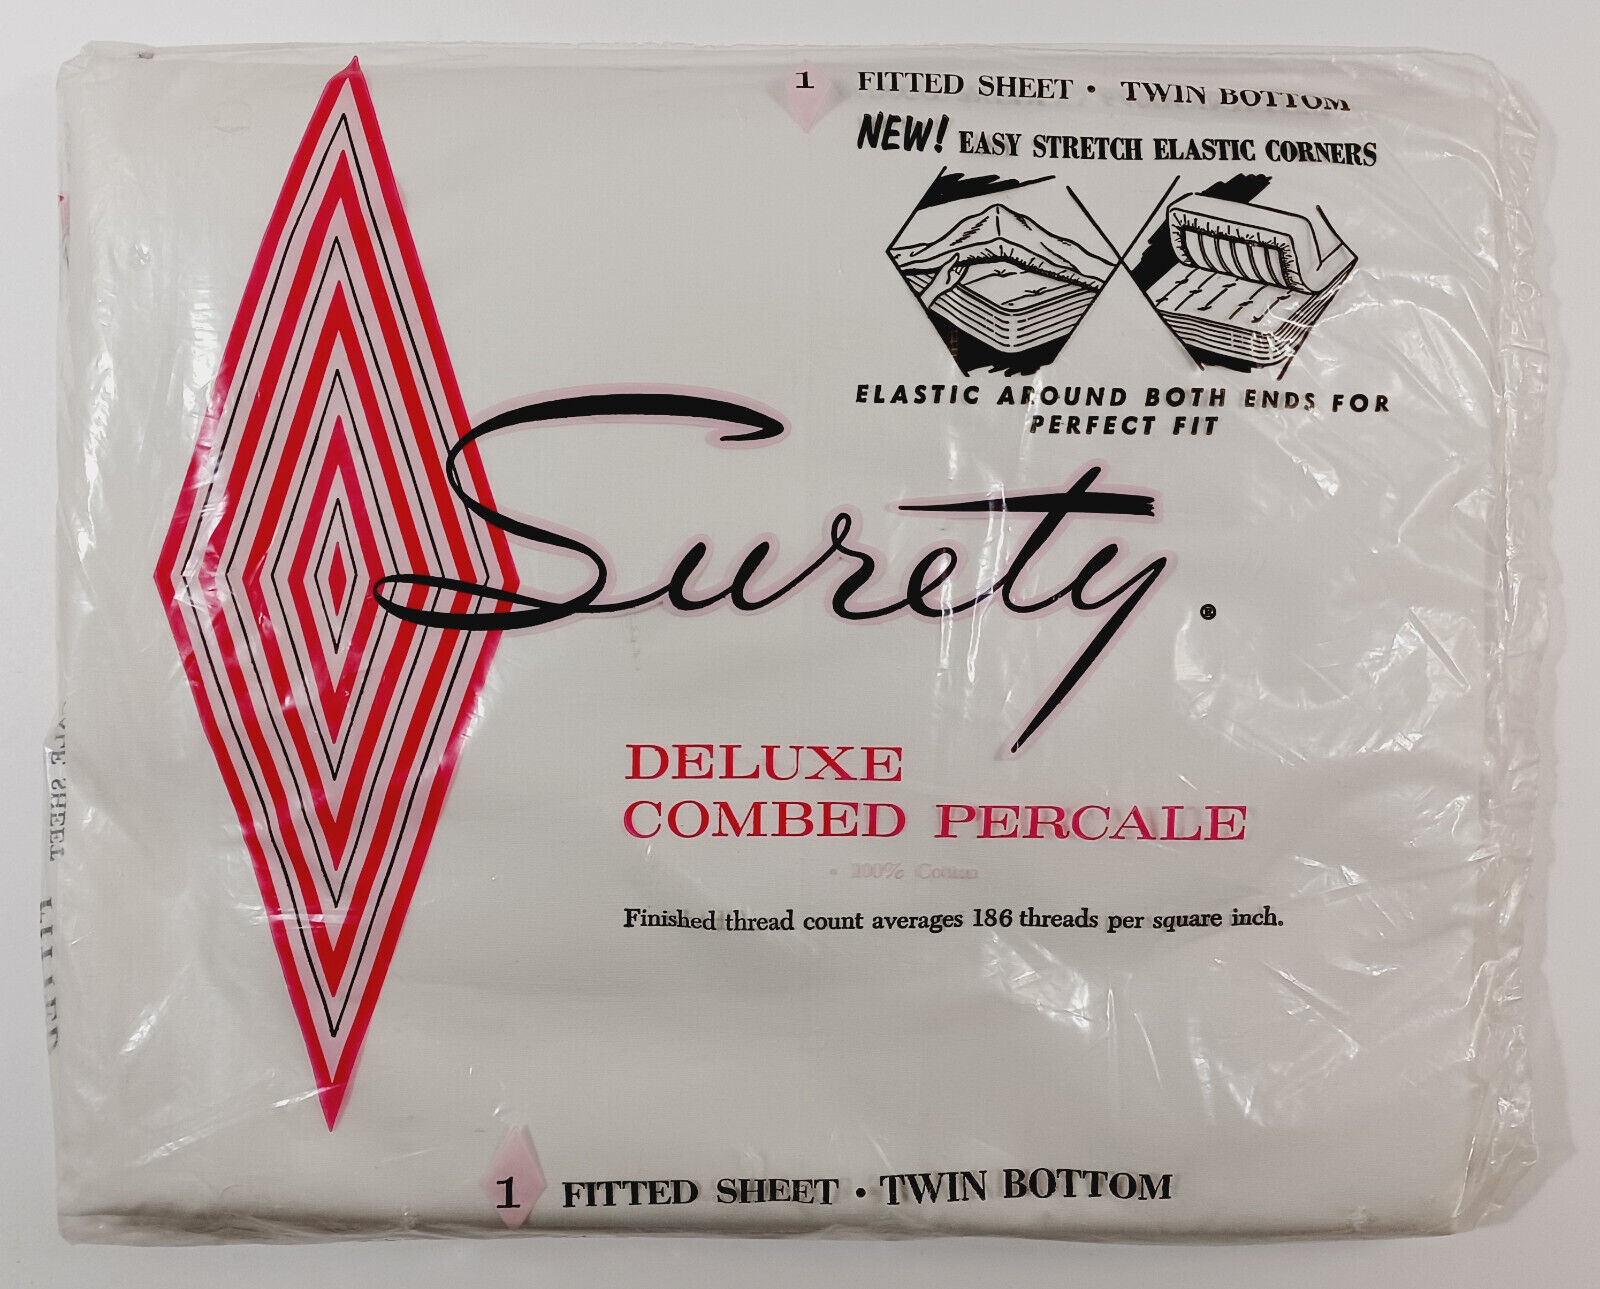 Vintage Surety Deluxe Combed Percale Sheet Fitted Twin Bottom USA - NEW